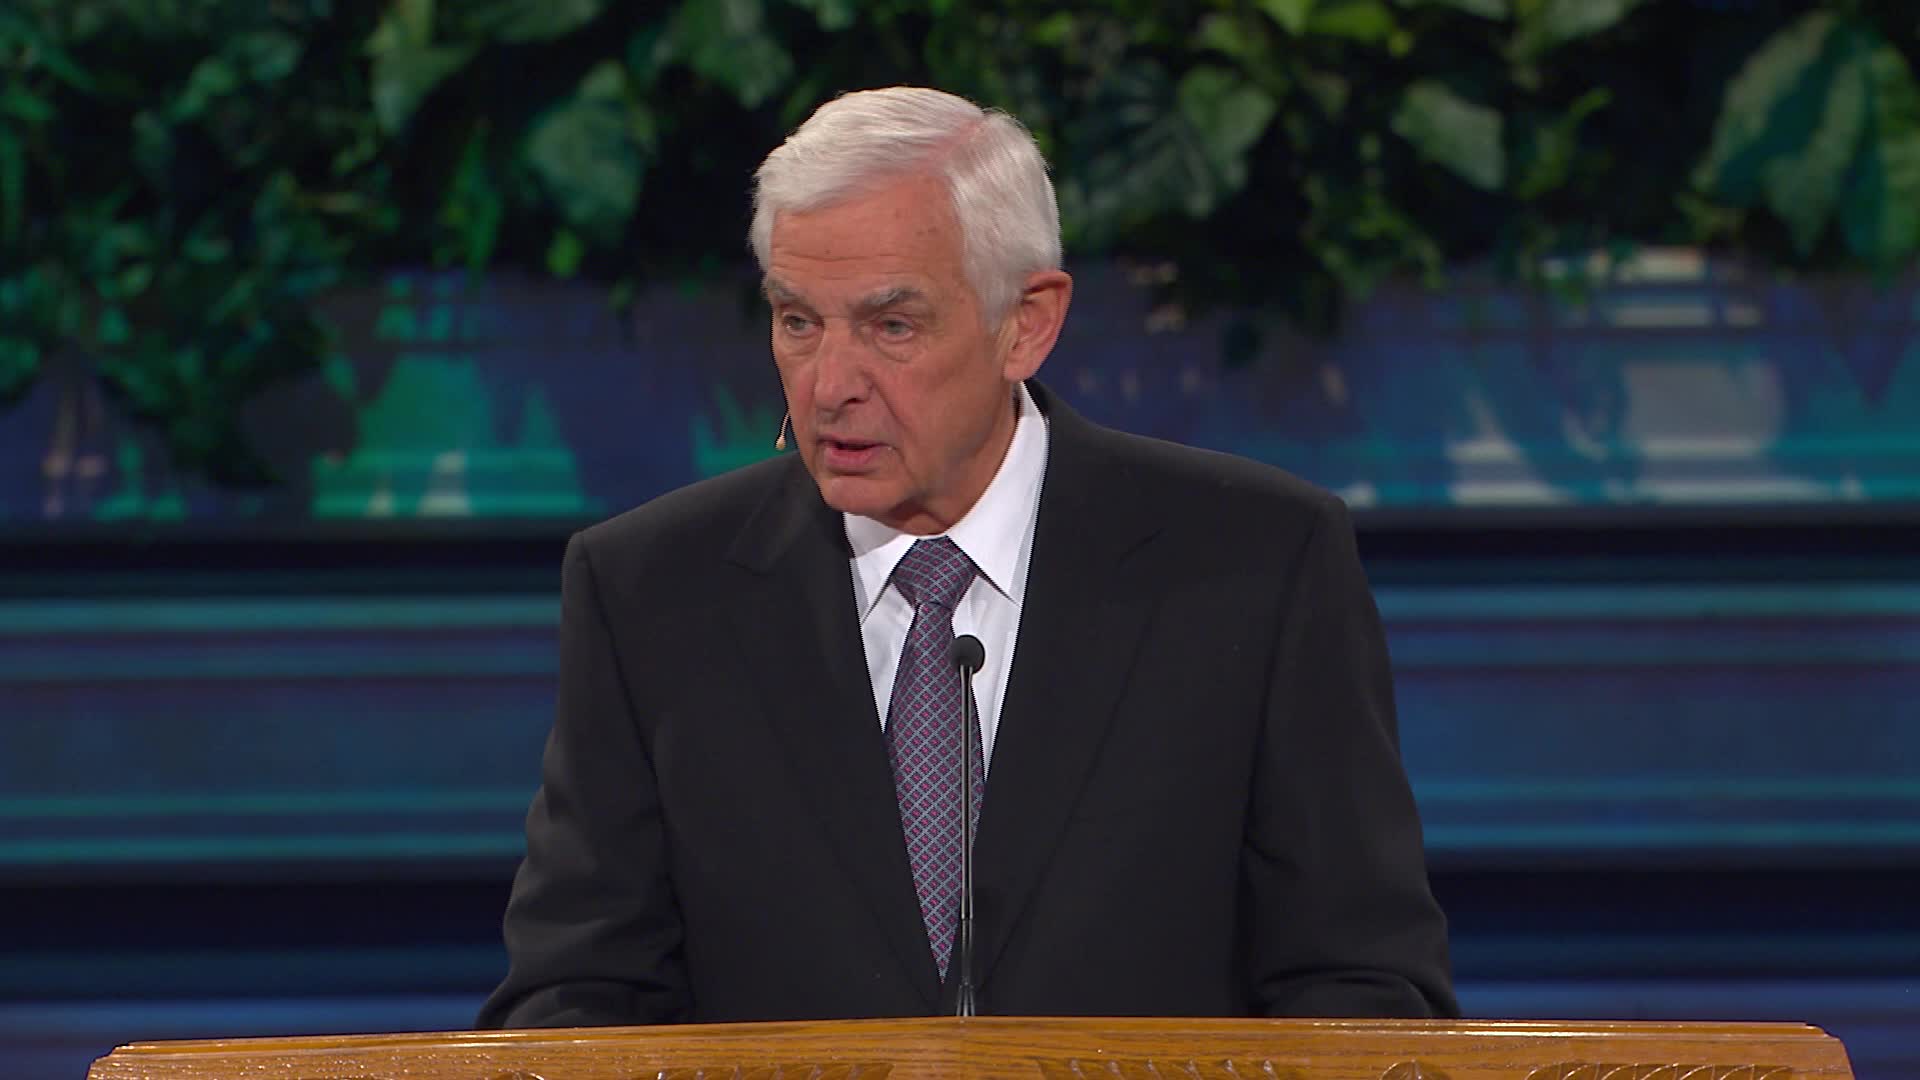 He says nothing good at all of this church by Prophecy Academy  with Dr. David Jeremiah